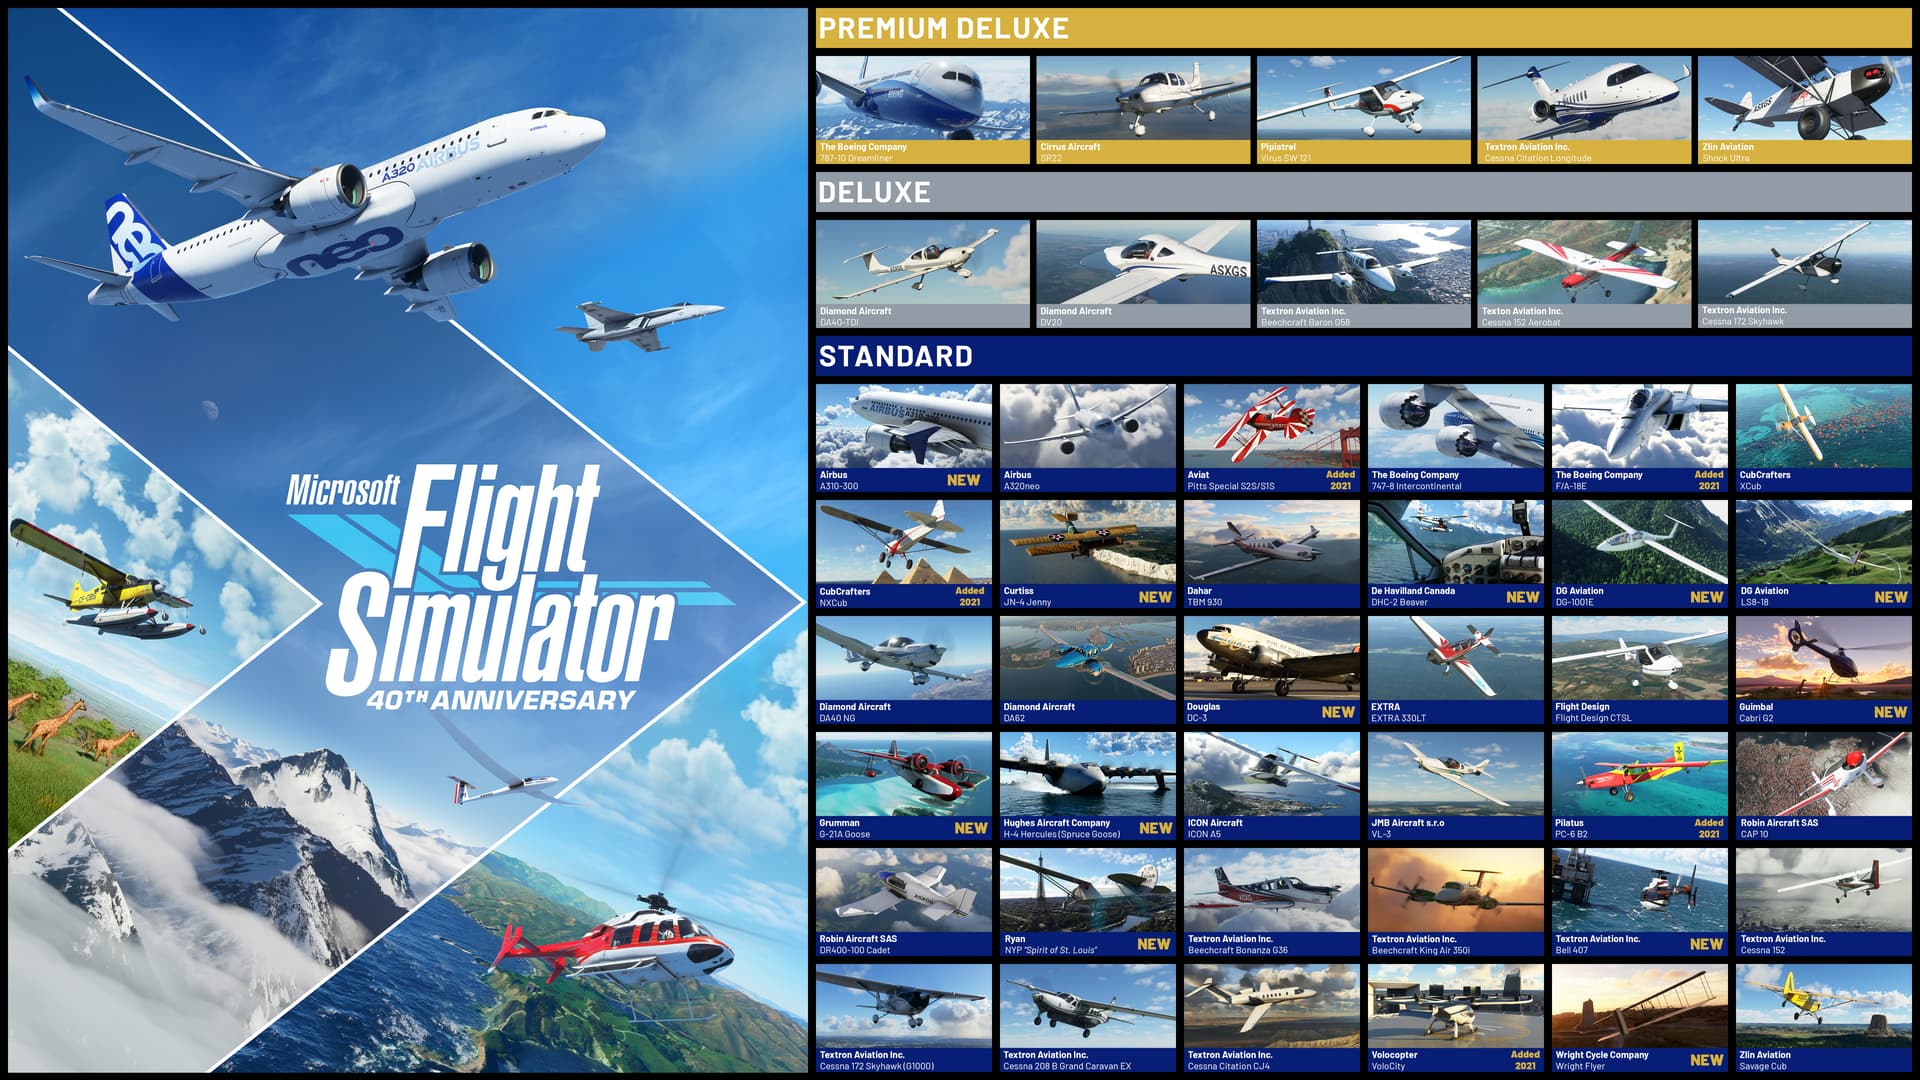 Microsoft's Flight Simulator gets helicopters, gliders, and Spruce Goose